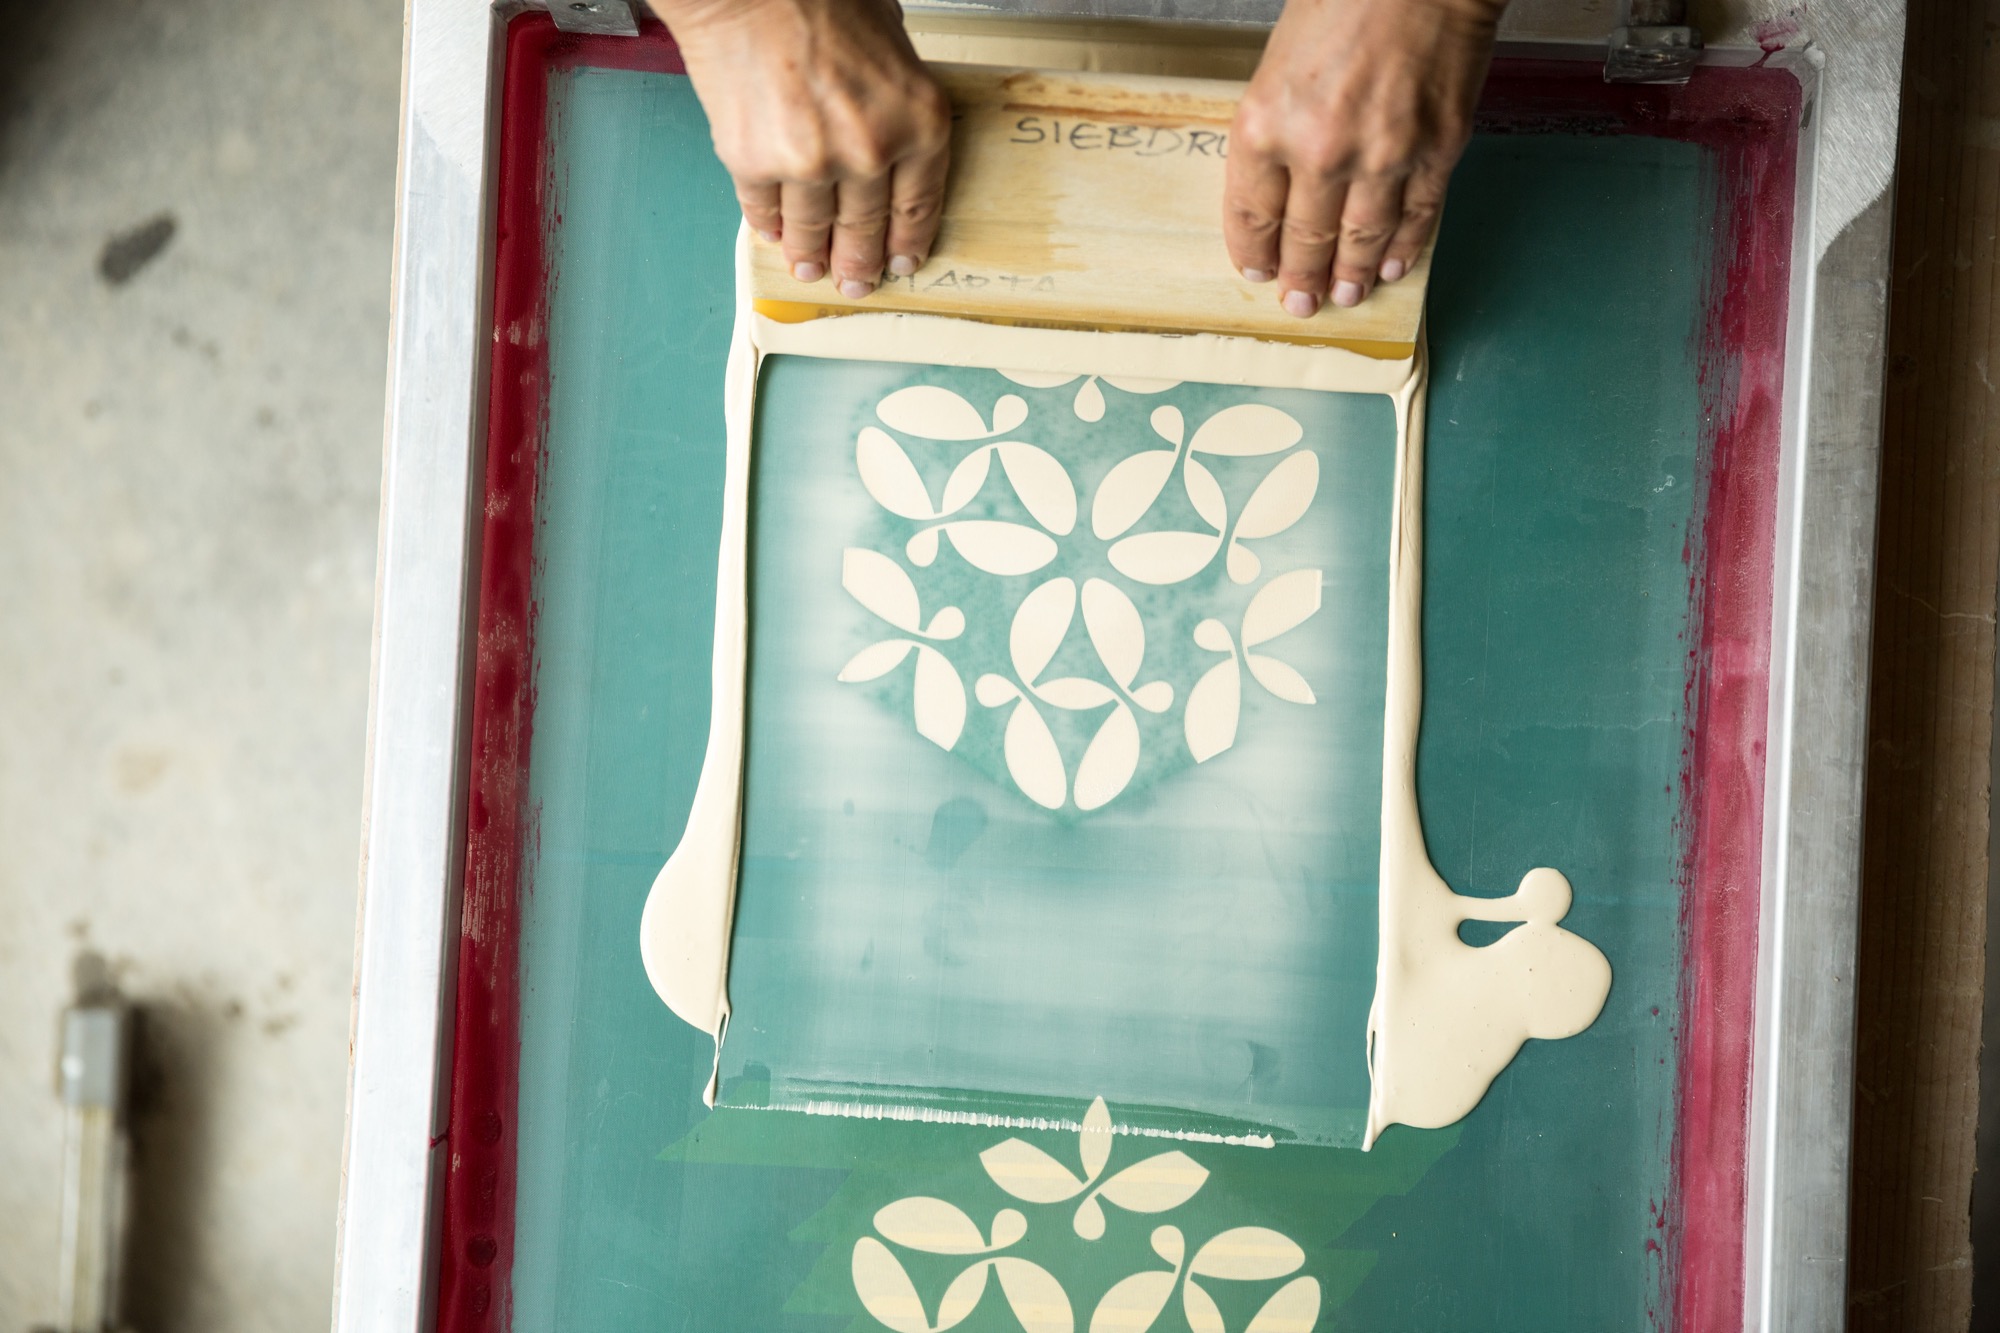 Sebastian's designs are applied to his mother's tiles through silk screening